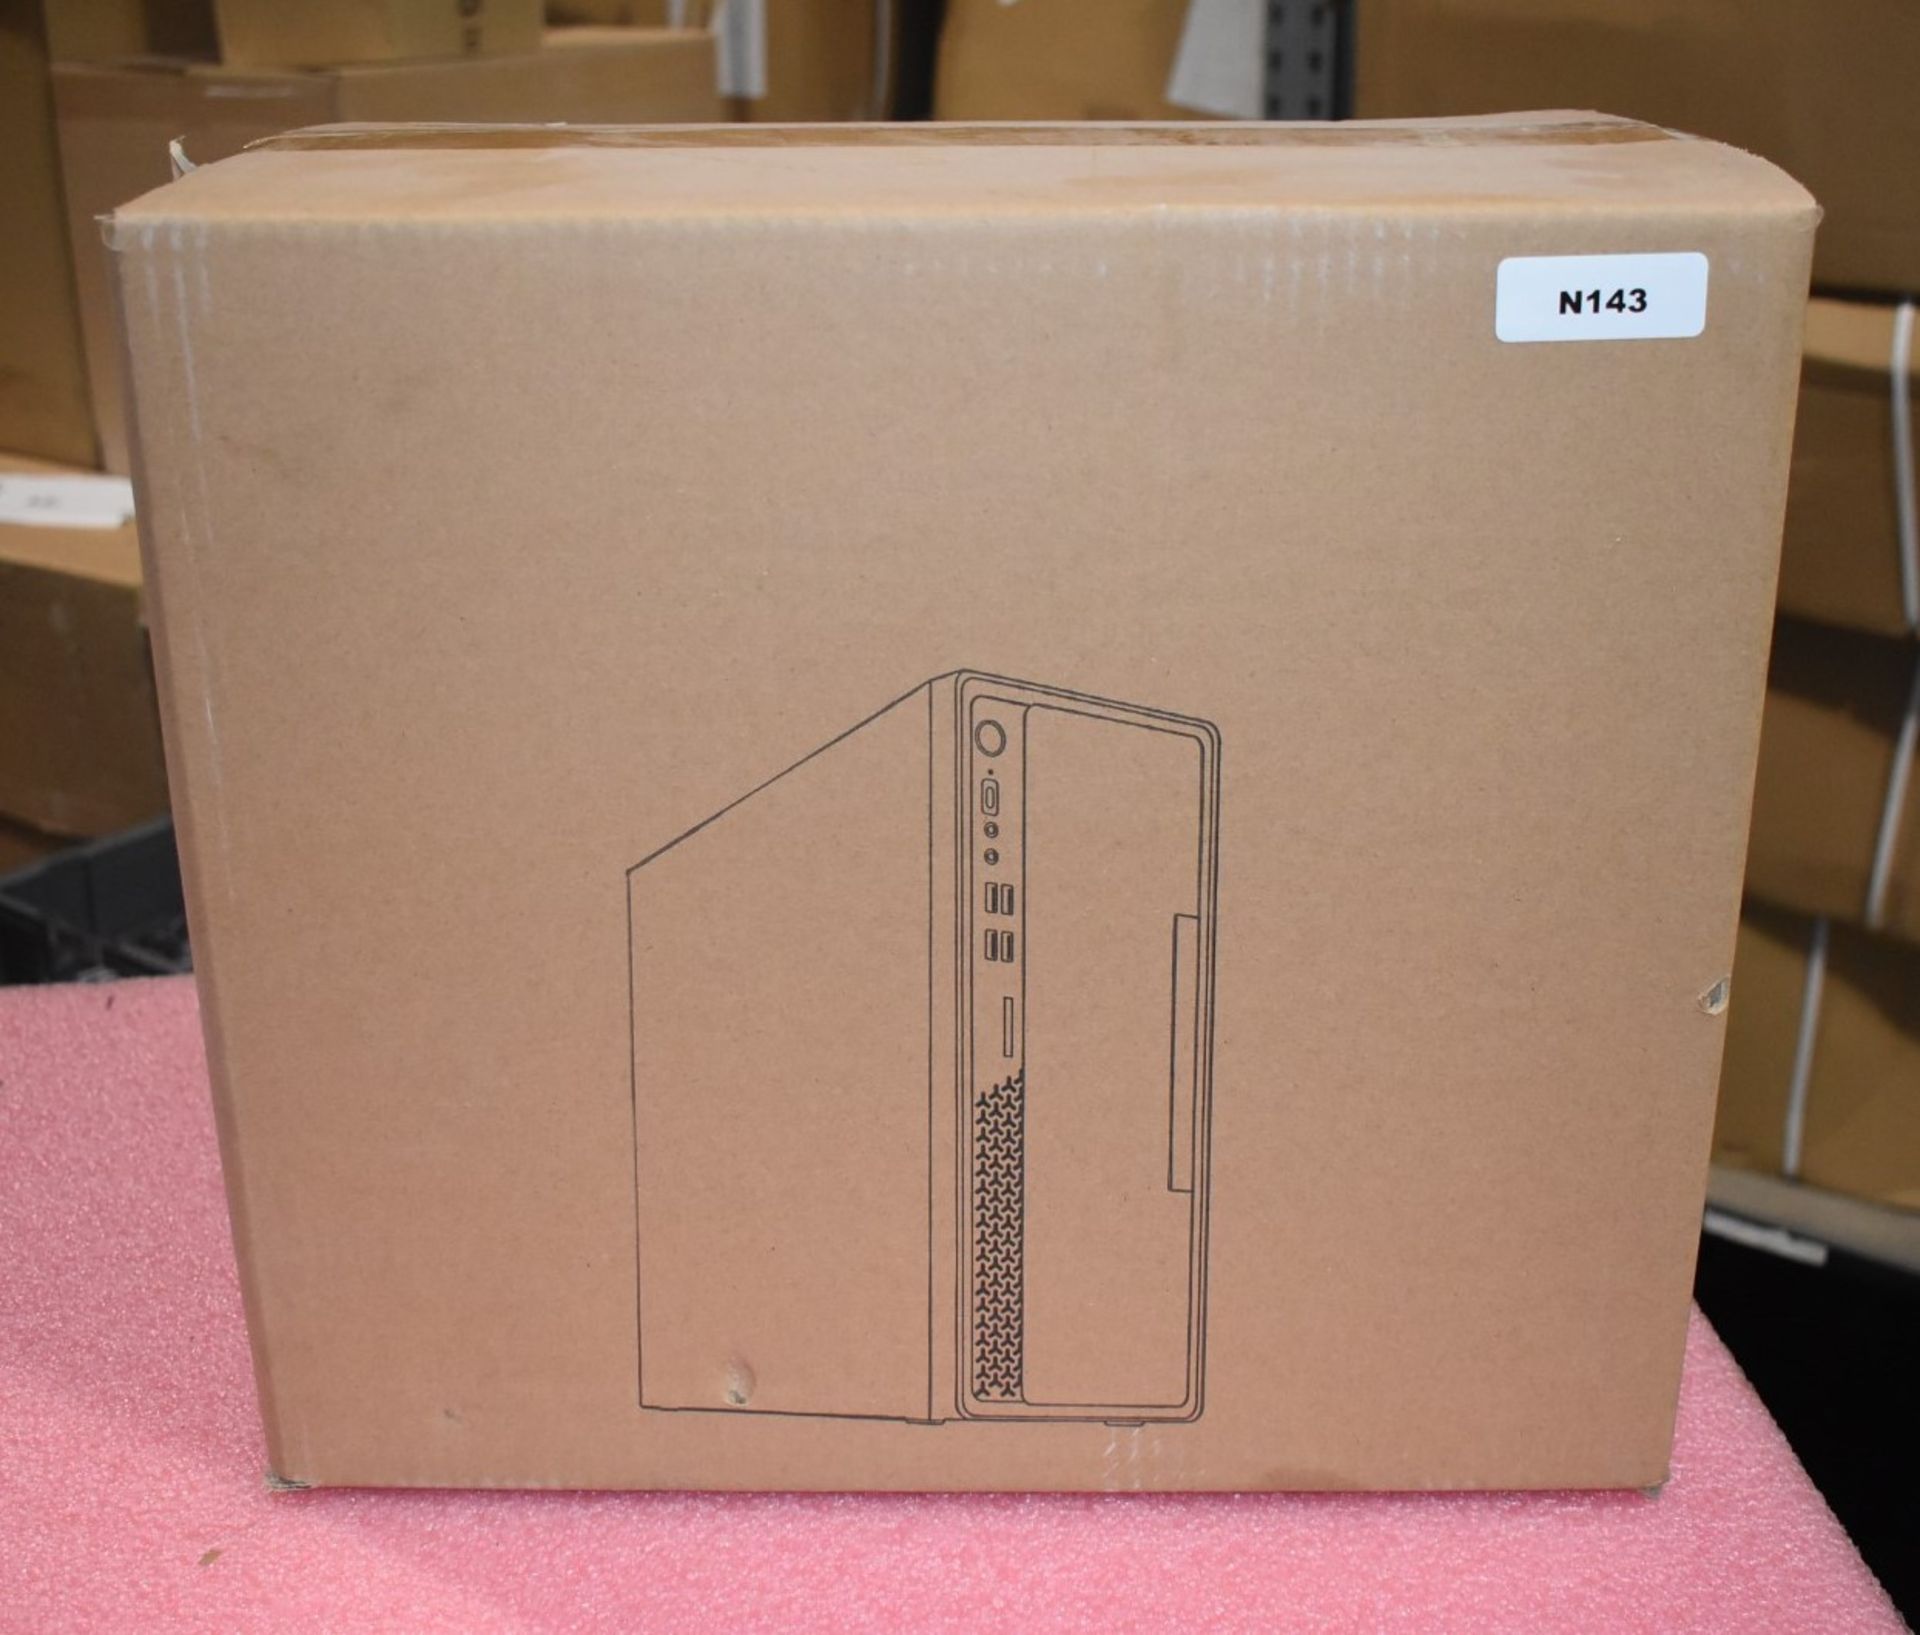 1 x CIT SI001BK Slim Micro ATX SFF PC Case With Type C Port - New Boxed Stock - Image 2 of 4